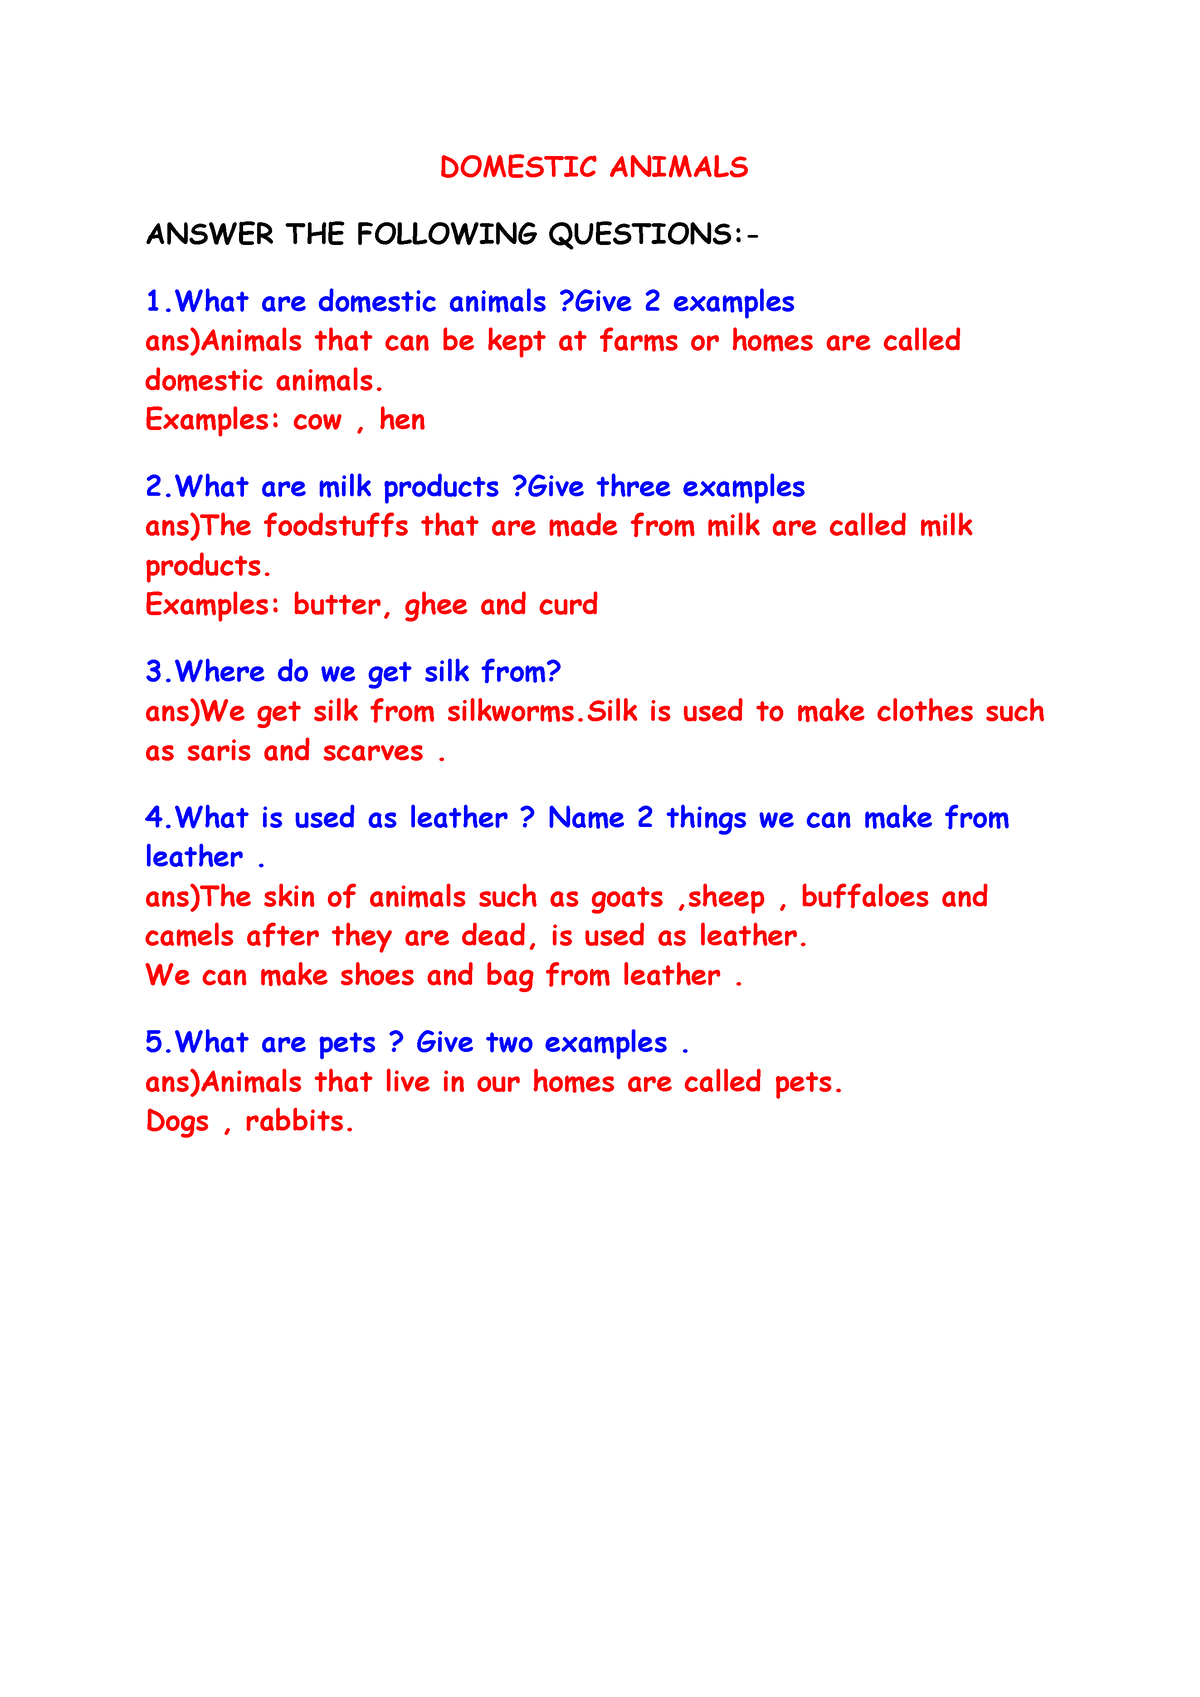 Domestic Animals - answers - DOMESTIC ANIMALS ANSWER THE FOLLOWING  QUESTIONS:- 1 are domestic - Studocu